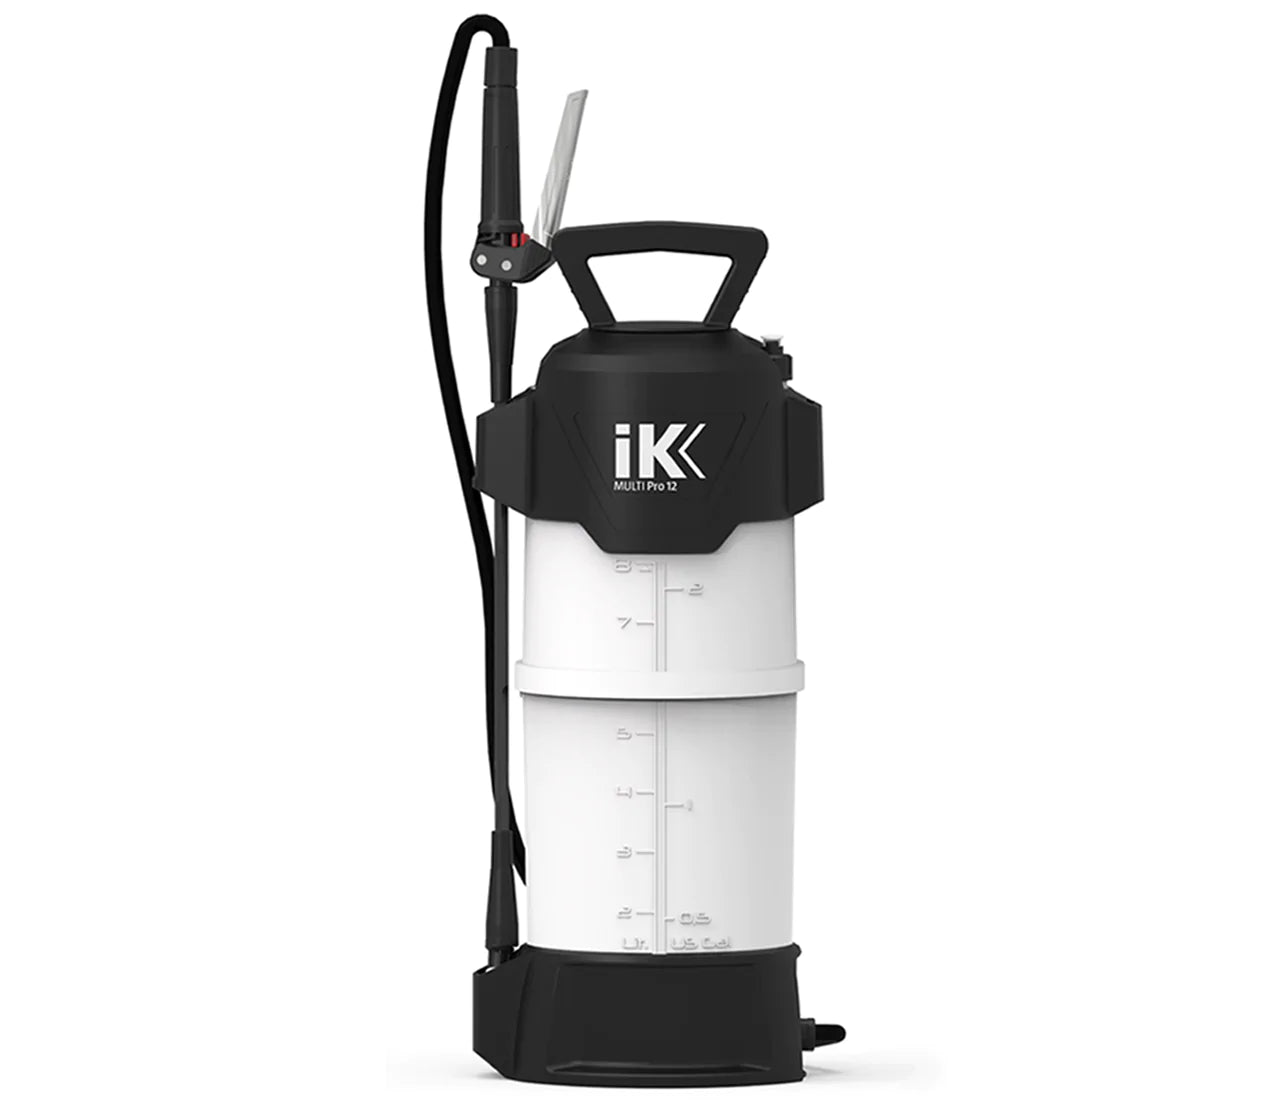 Can confirm the iK Foam PRO 2 Pump Sprayer is worth getting to